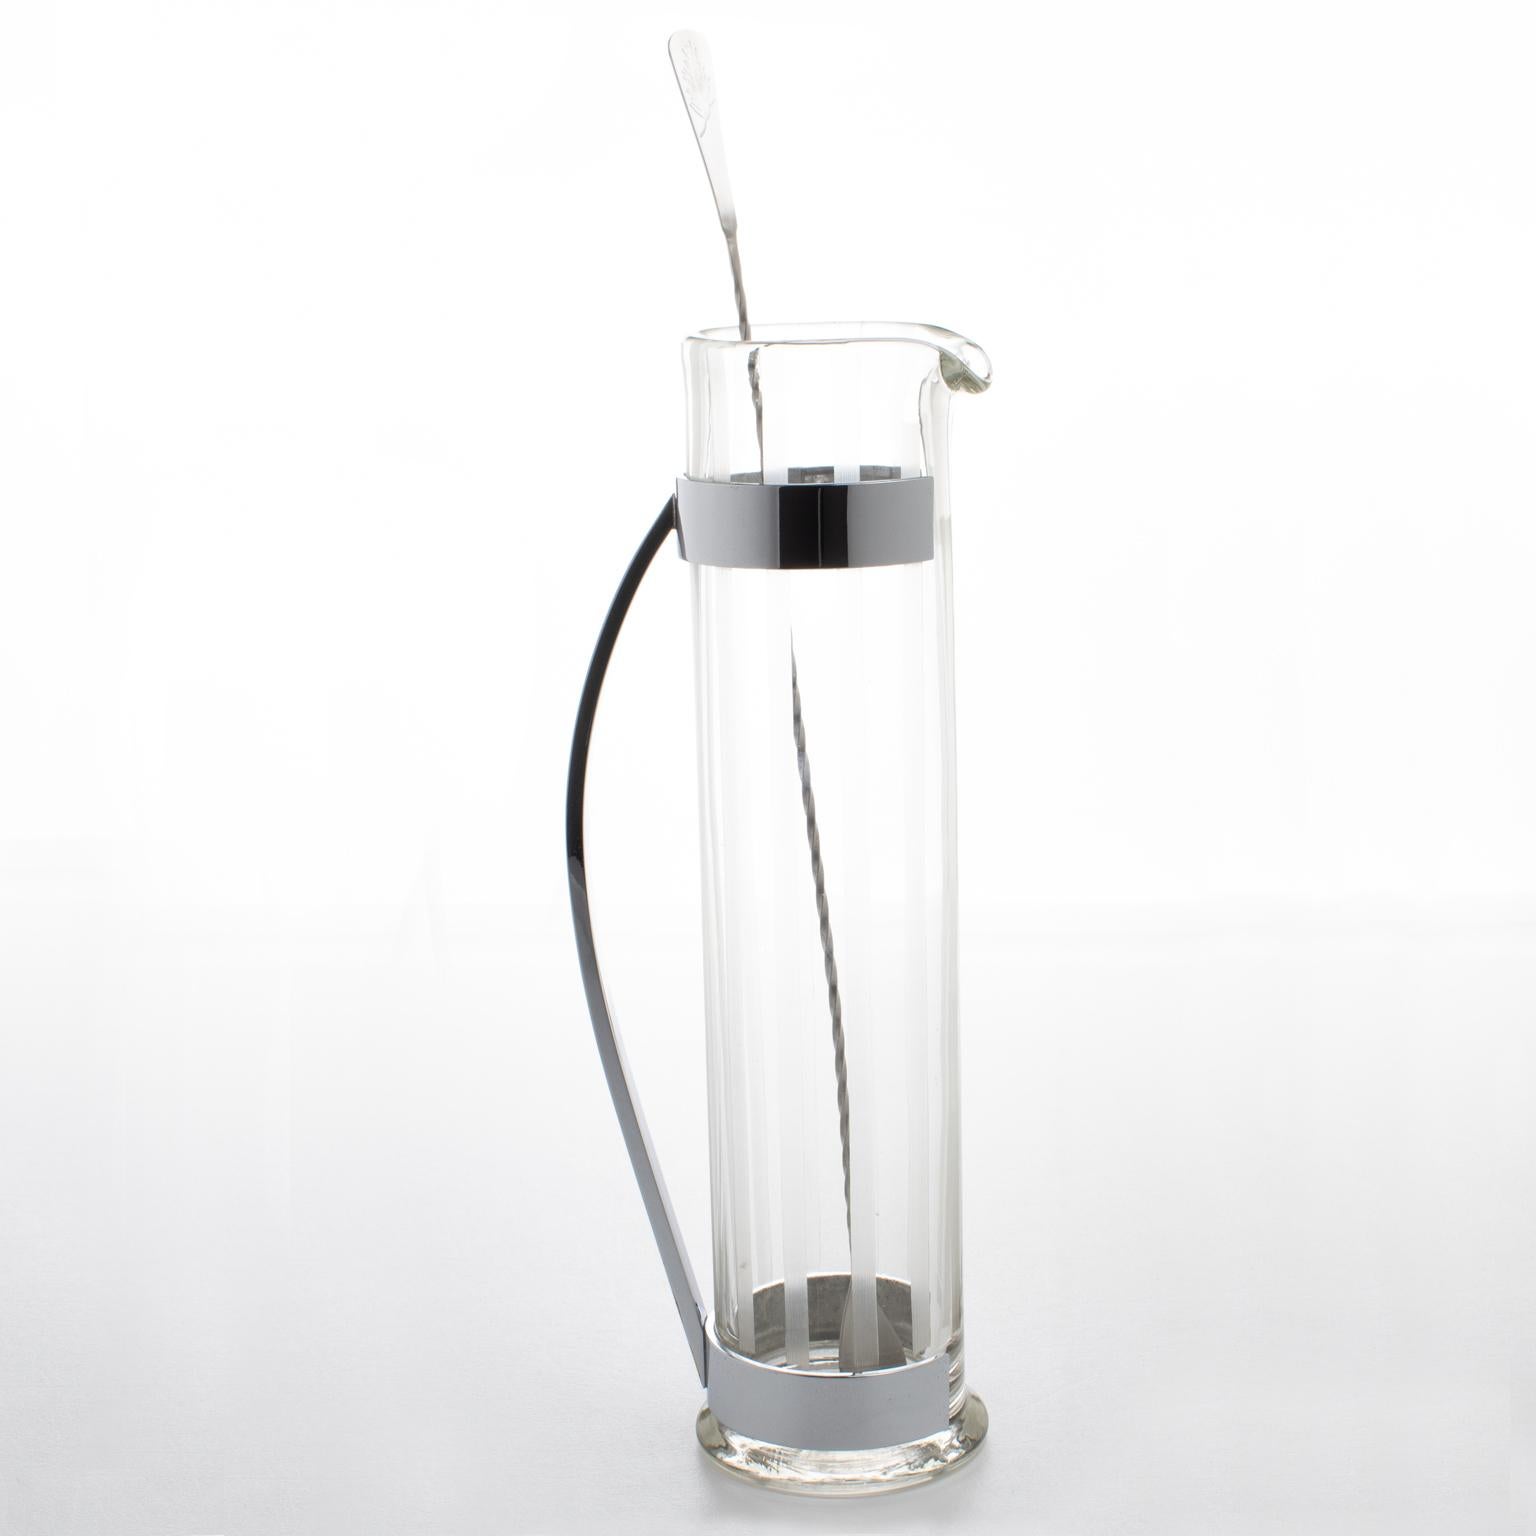 Hawkes Inc. designed this superb streamlined American Art Deco barware pitcher in the 1940s. The sleek modernist super extra-tall design features a hand-blown Martini pitcher or mixer jug and a long stirrer spoon. The glass body of the pitcher has a